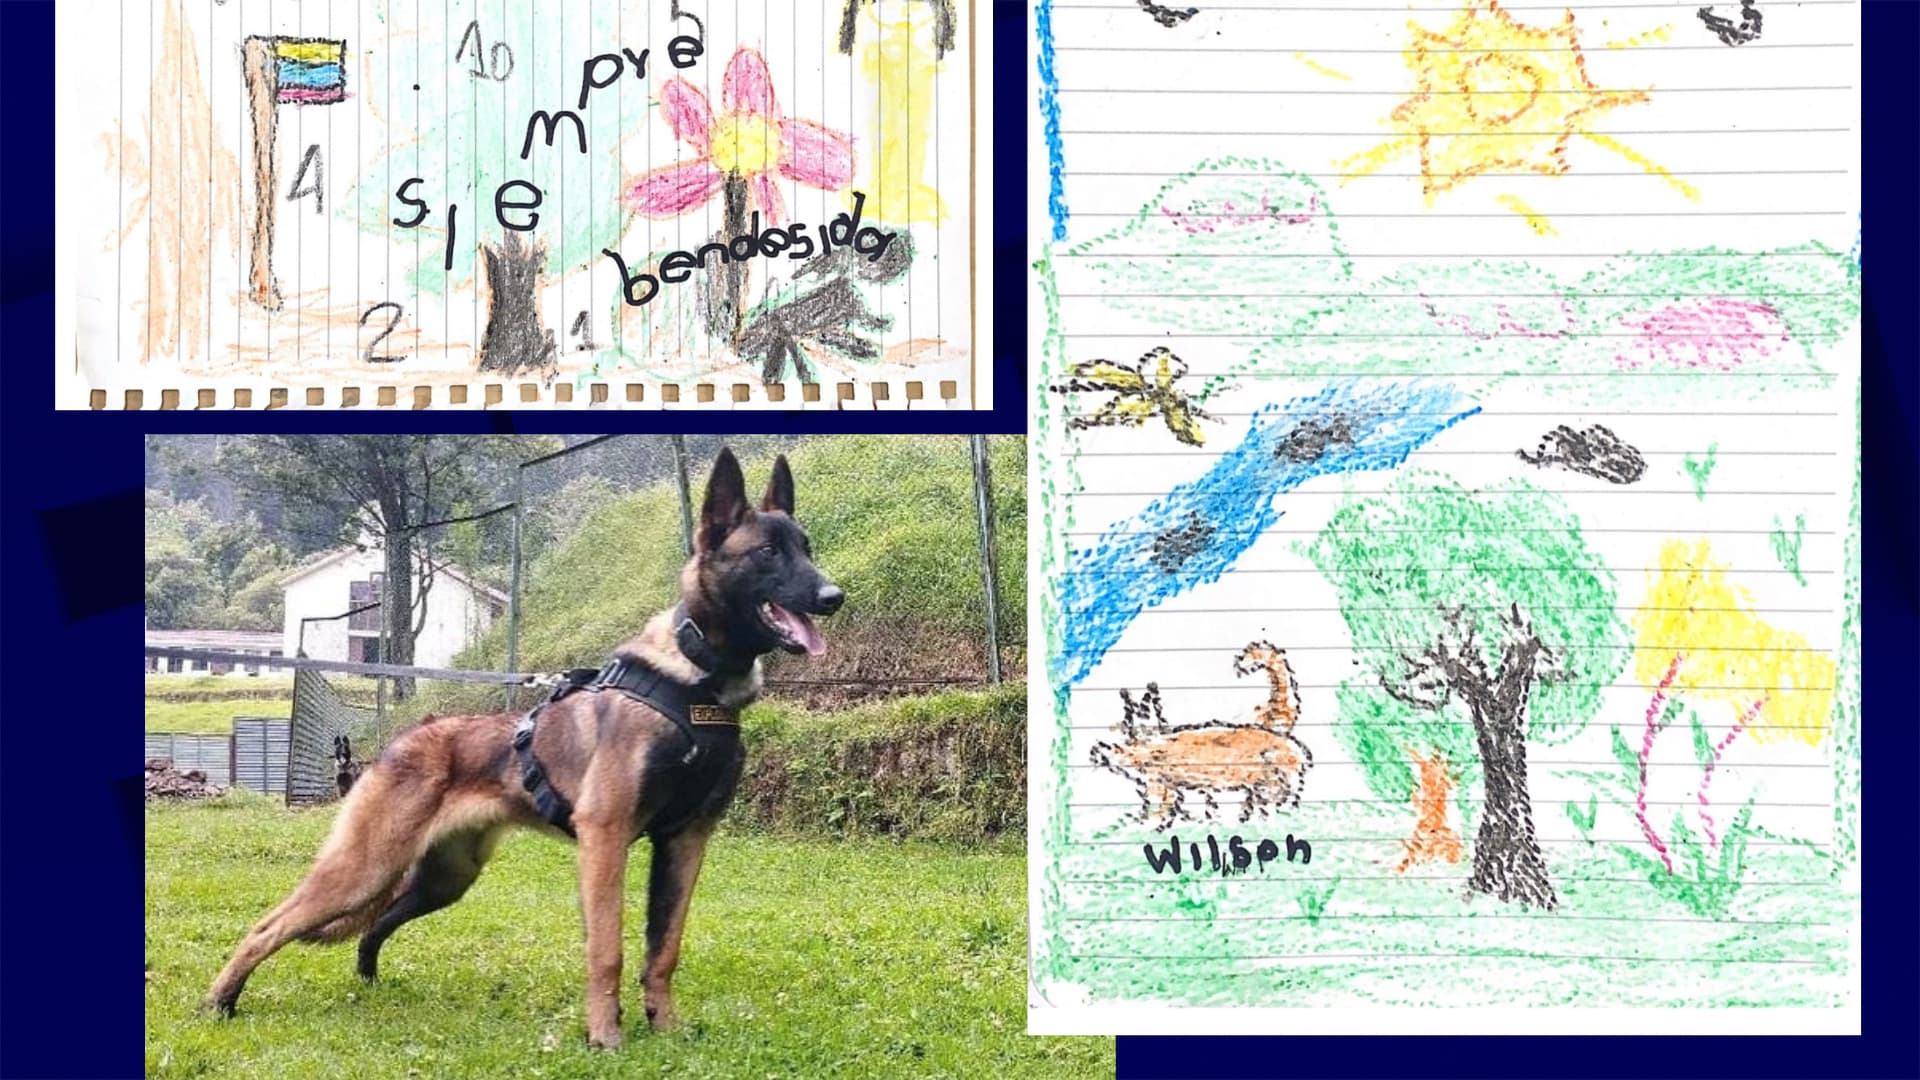 The first cartoons of children rescued in the woods depicted Wilson, a dog lost during a search